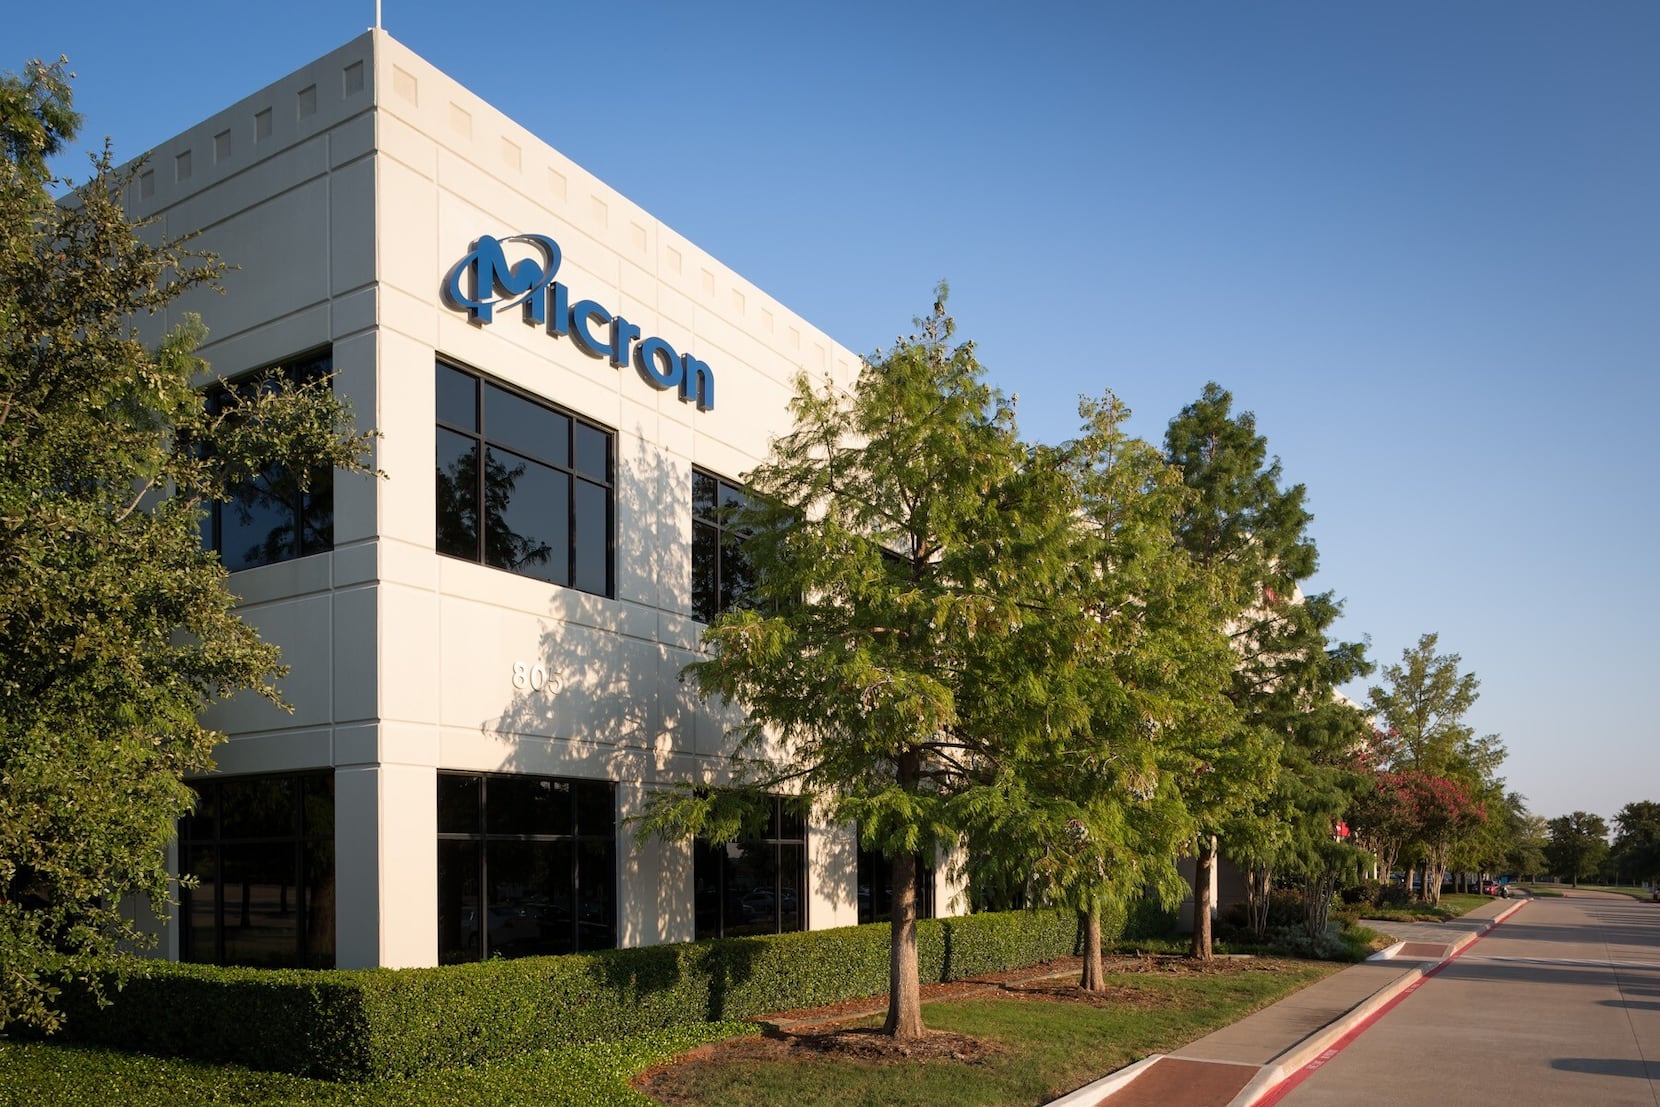 Micron Stock: How Does Micron Technology Make Money In 2022?